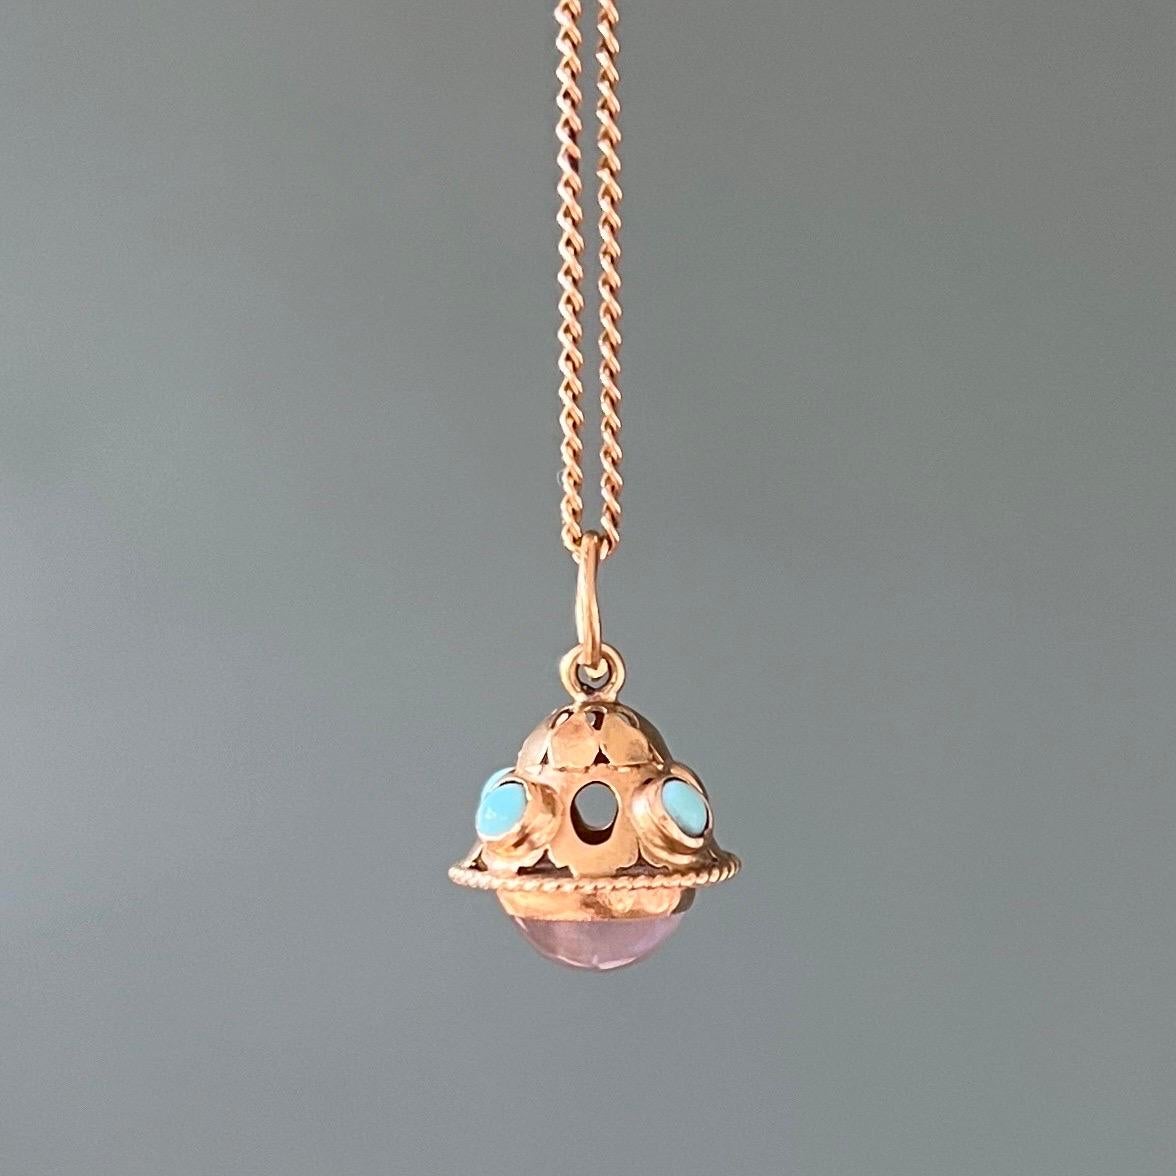 A vintage 18 karat yellow gold and turquoise charm pendant. The charm is nicely crafted and set with four turquoise stones around the upper body. At the bottom the charm is set with a moonstone cabochon stone, which is translucent and has a lovely